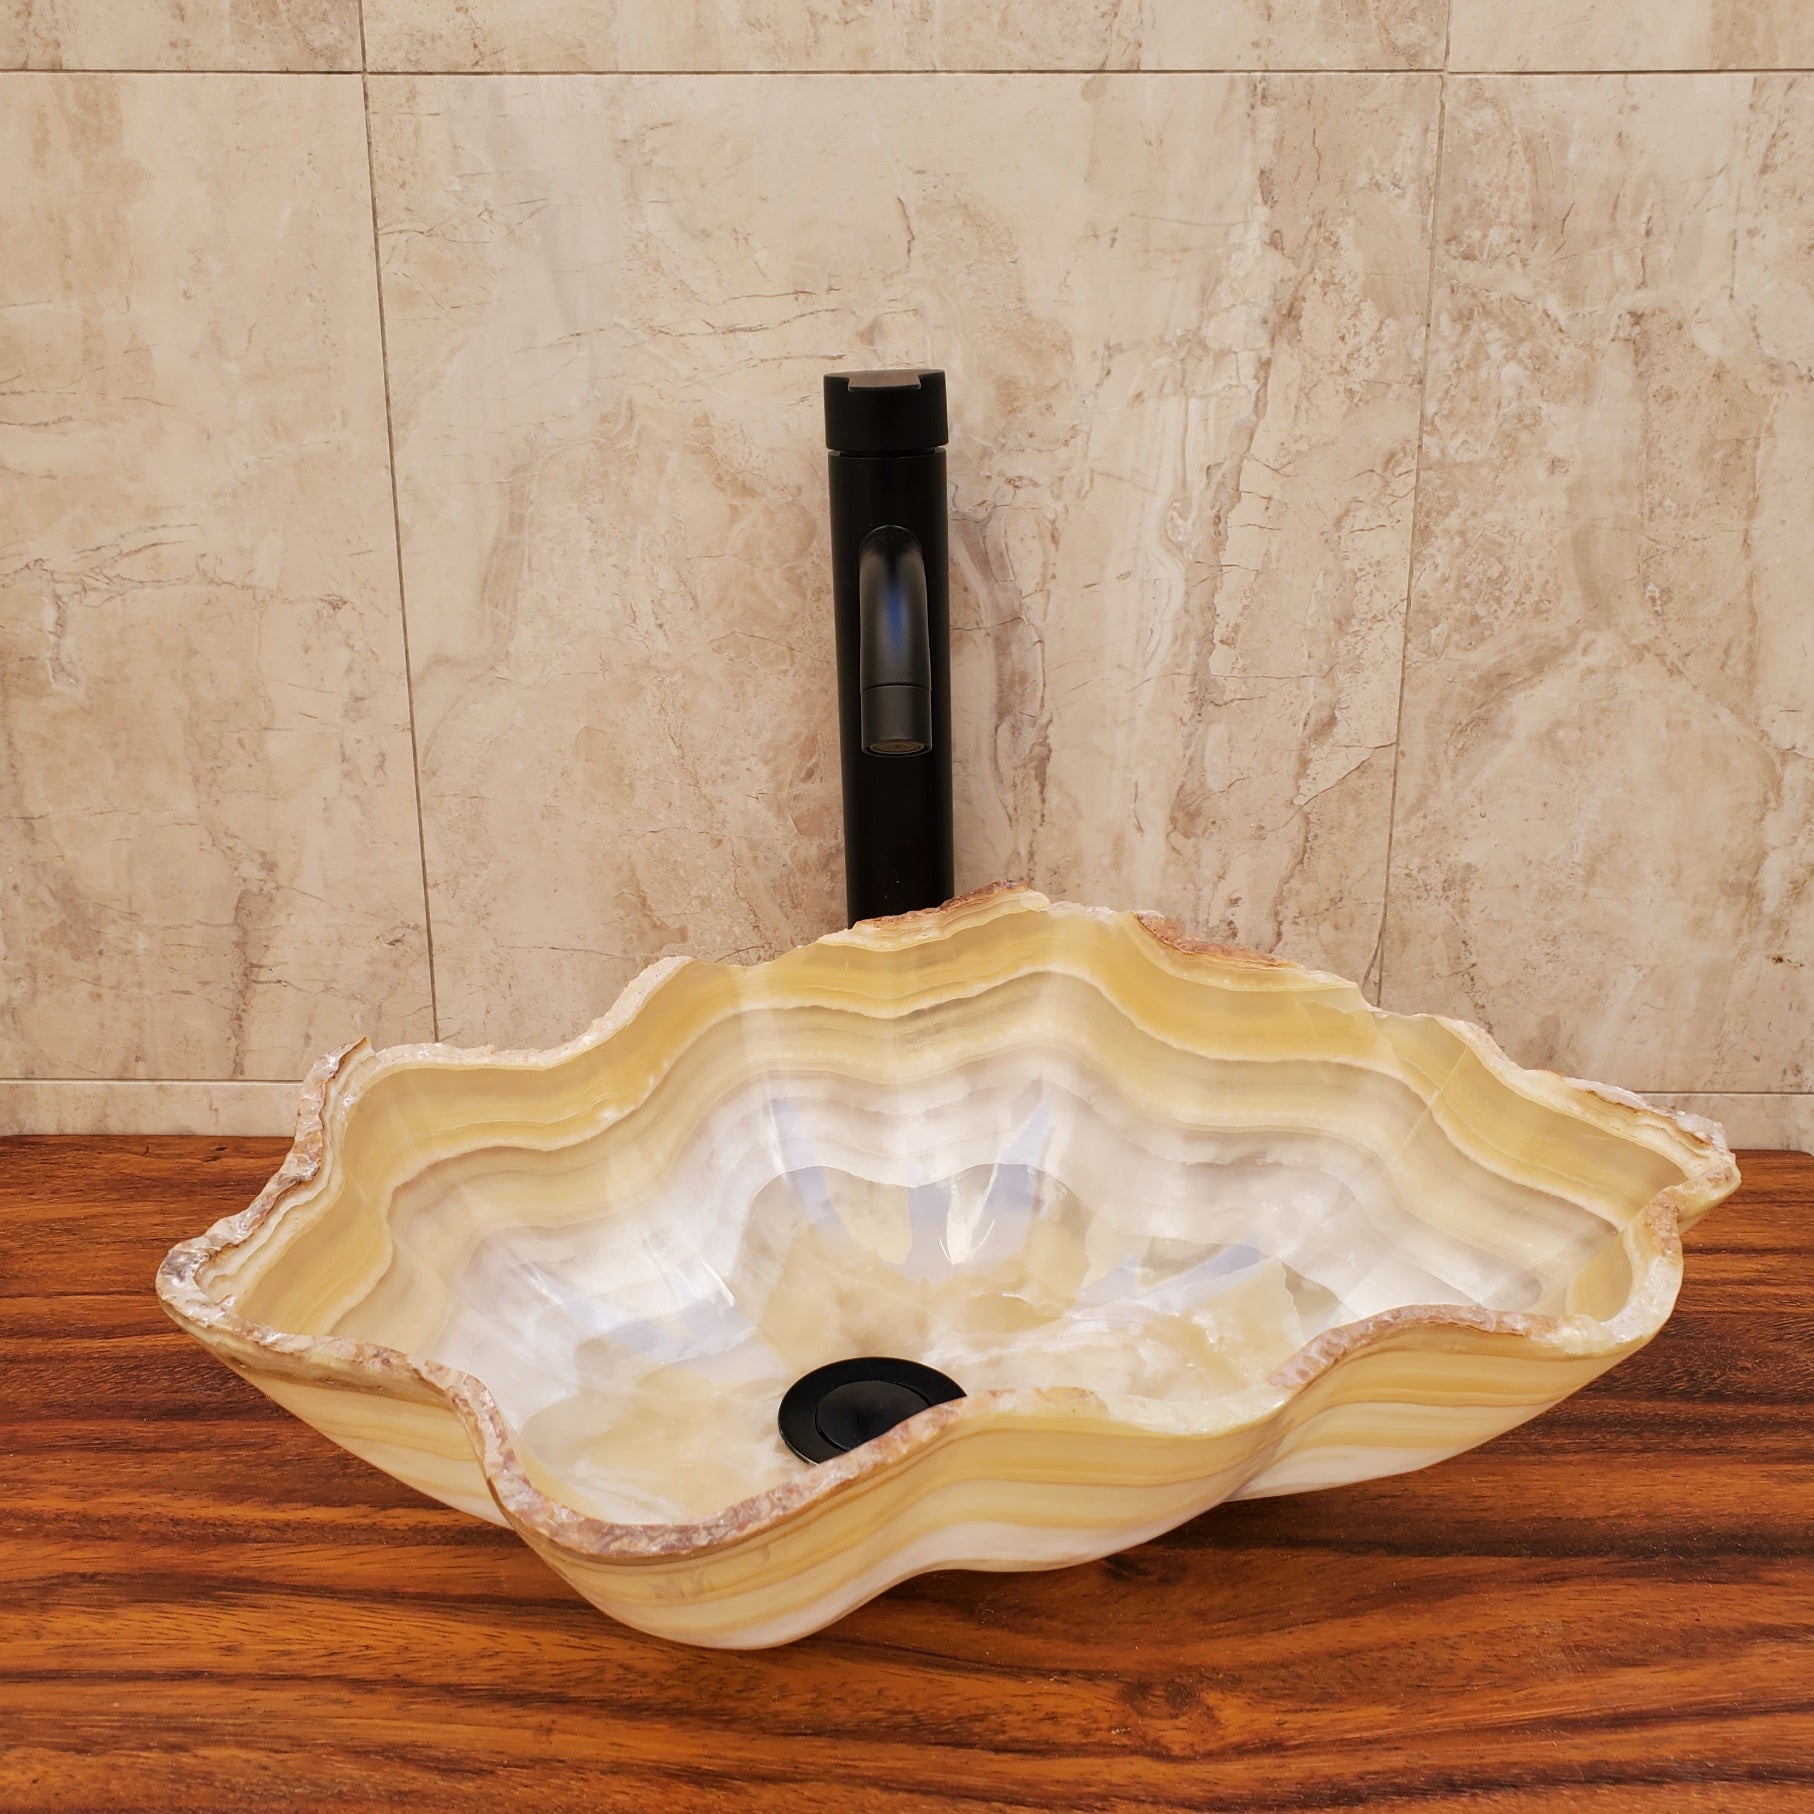 Beige and White Onyx Oyster Shell Shaped Vessel Sink. Handmade in Mexico. We hand finish and ship from the USA. Buy now at www.felipeandgrace.com.